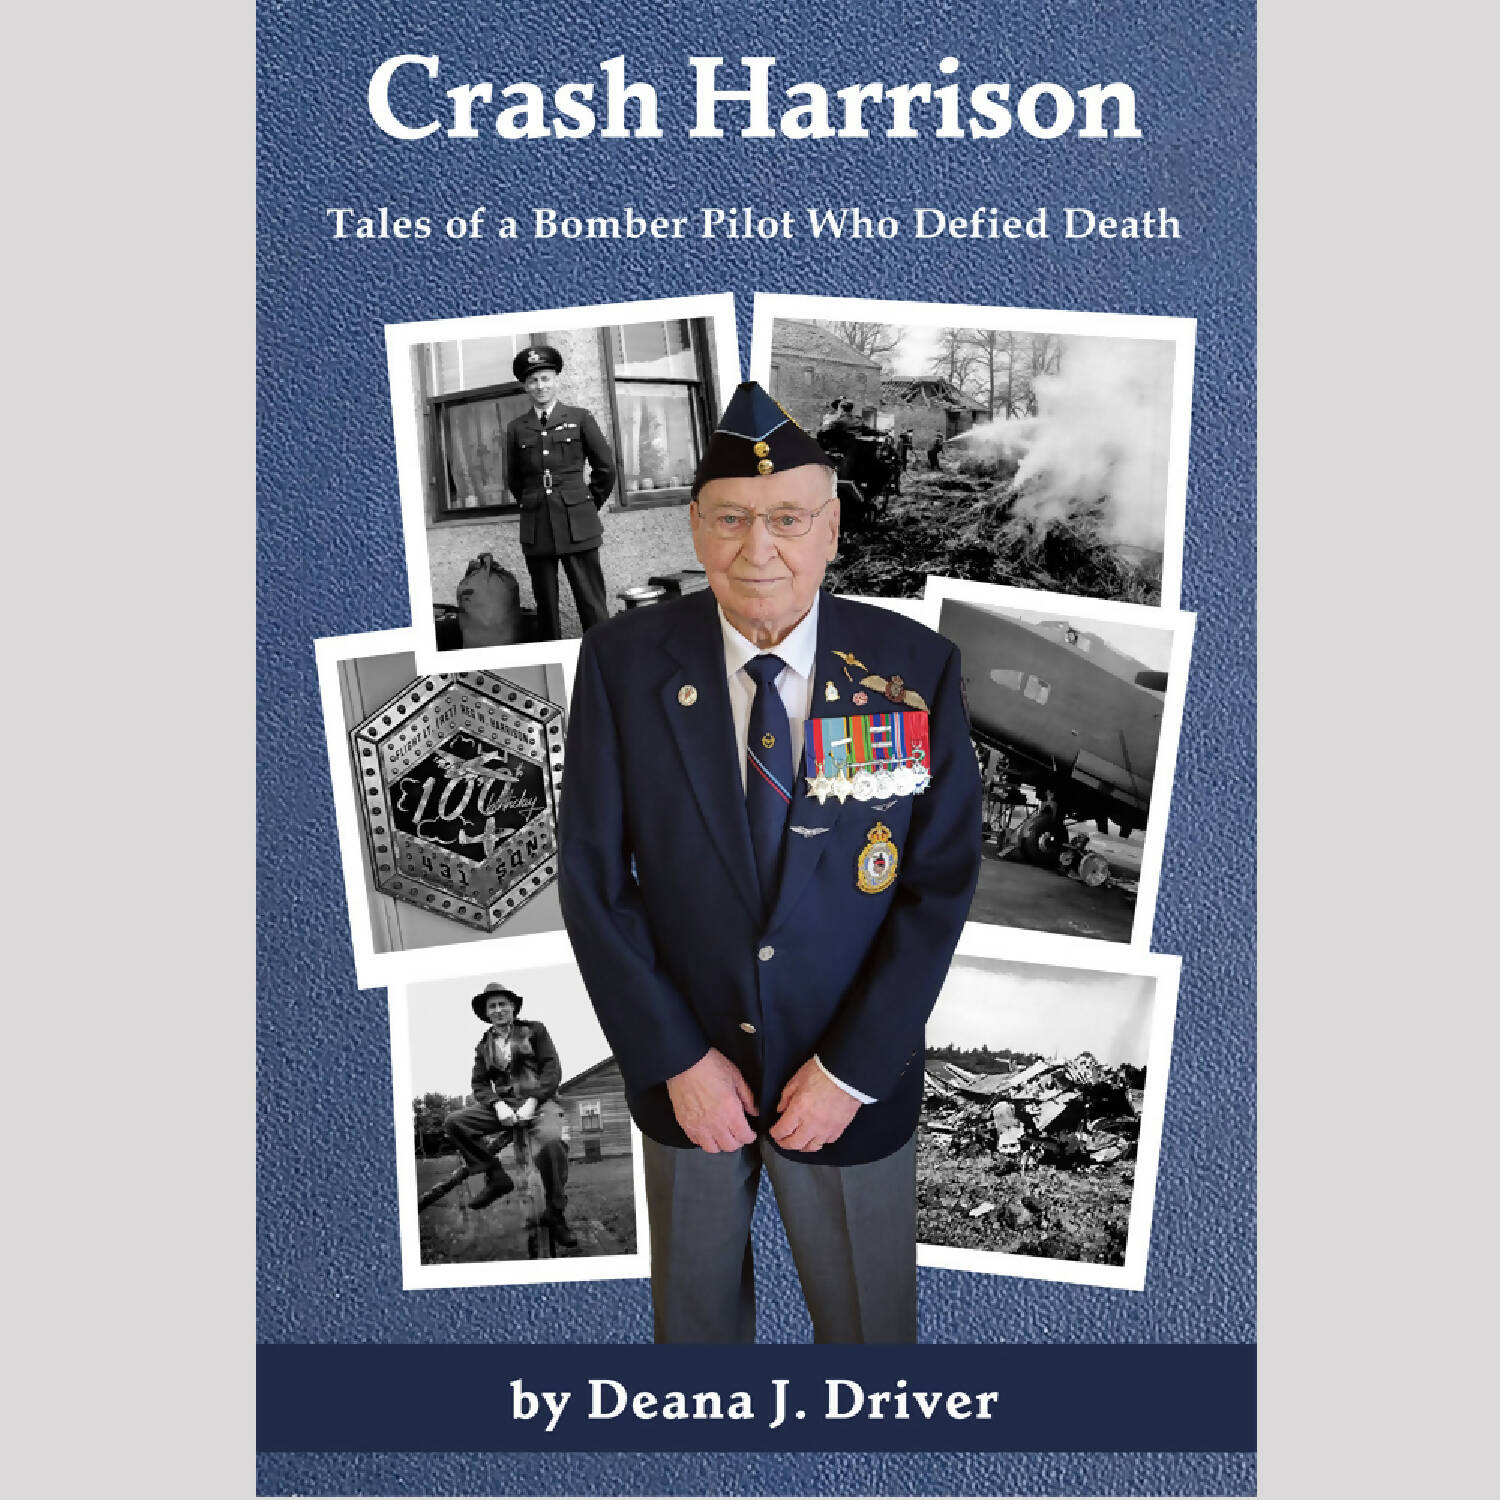 Crash Harrison - Tales of a Bomber Pilot Who Defied Death